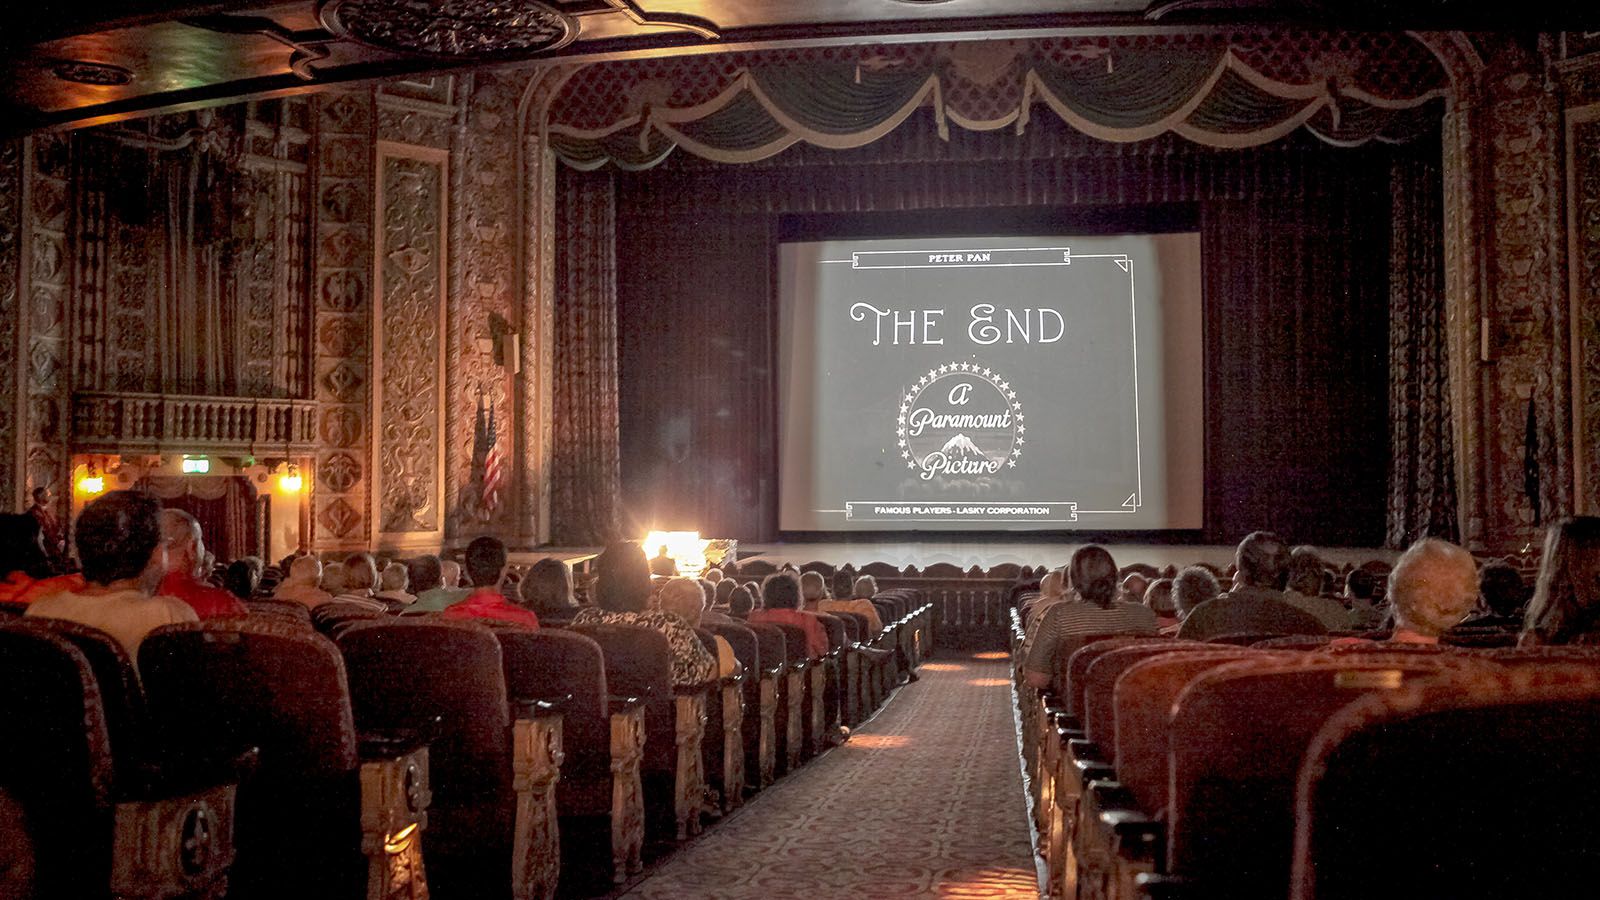 Silent films return to Embassy Theatre this summer with the iconic Grande Page Pipe Organ supplying the music and sound effects.